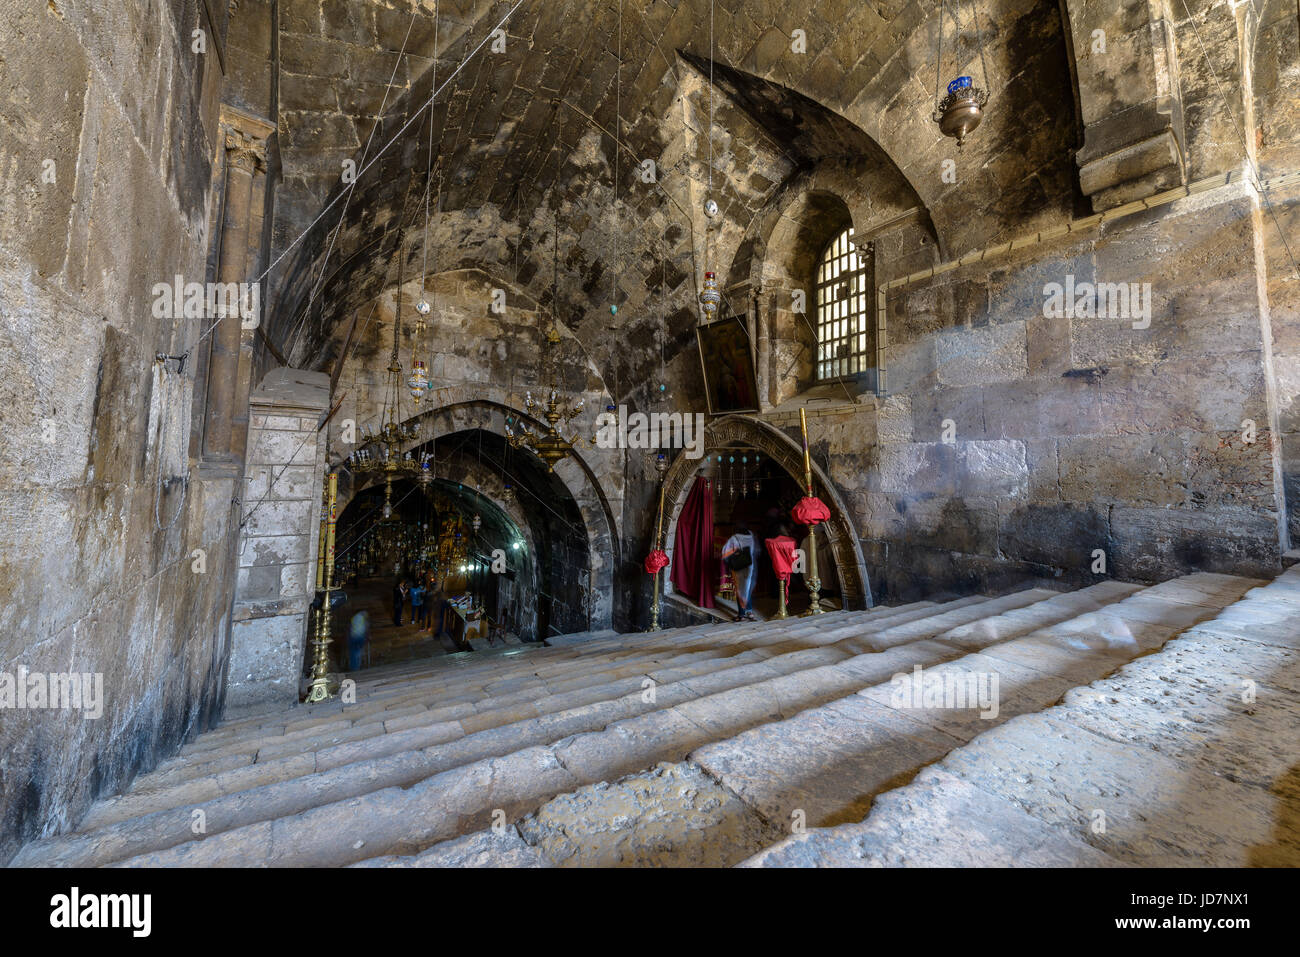 JERUSALEM, ISRAEL - April 18, 2015: Interior of the Tomb of the Virgin Mary, the mother of Jesus at the foot of mount of olives in Jerusalem Stock Photo